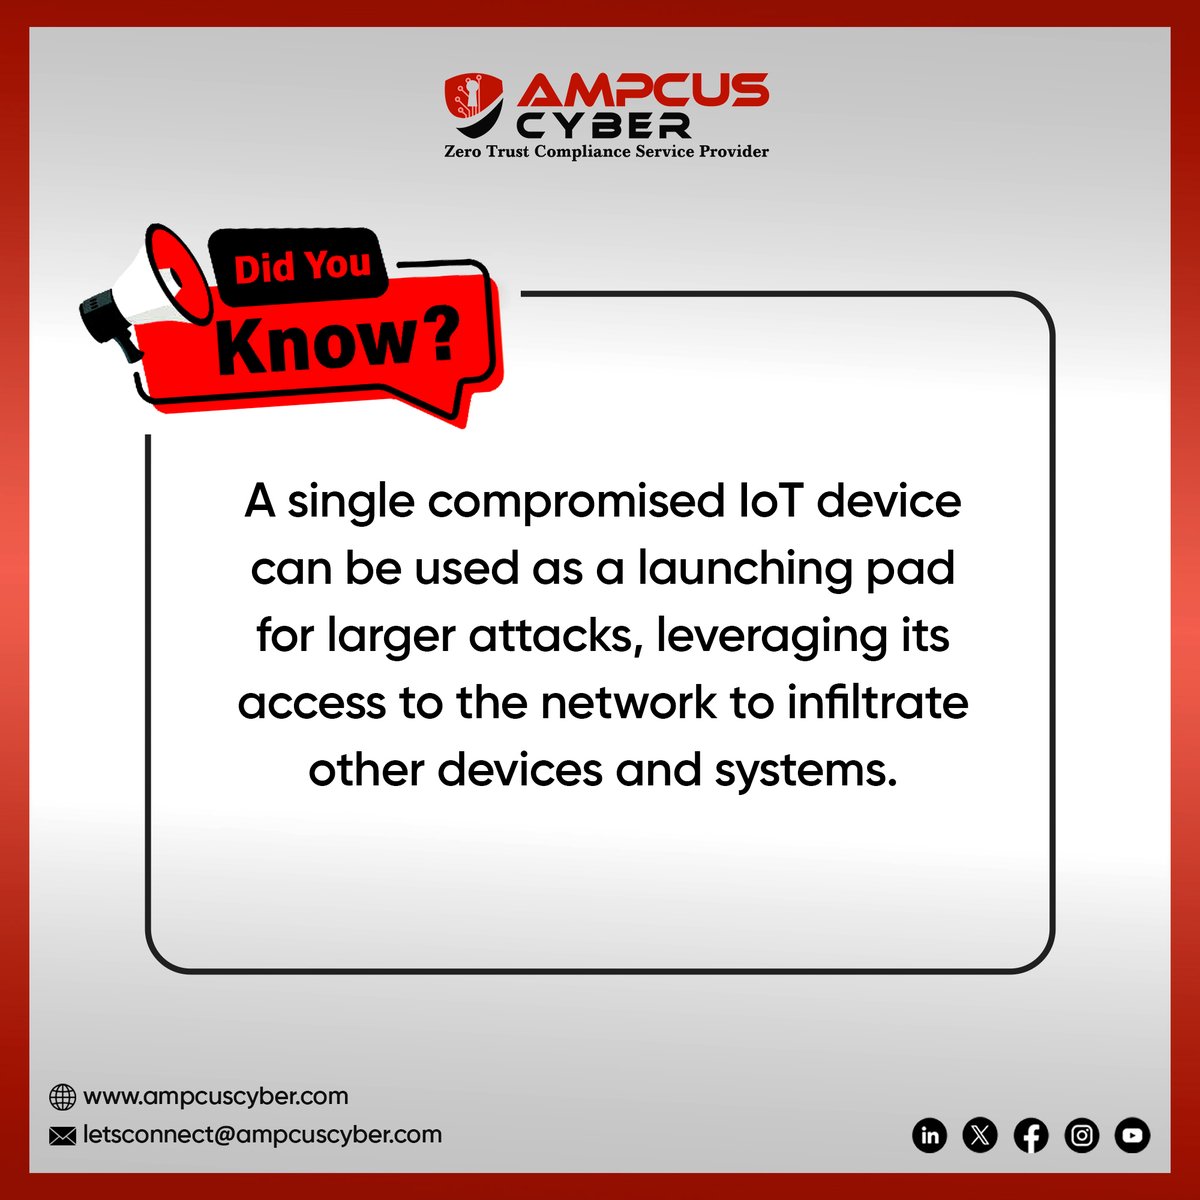 💡#Didyouknow that a single compromised IoT device can be used as a launching pad for larger attacks, leveraging its access to the network to infiltrate other devices and systems.
 
#ampcuscyber #didyouknowfacts #cybersecuritytraining #securitytraining   #phishingattacks